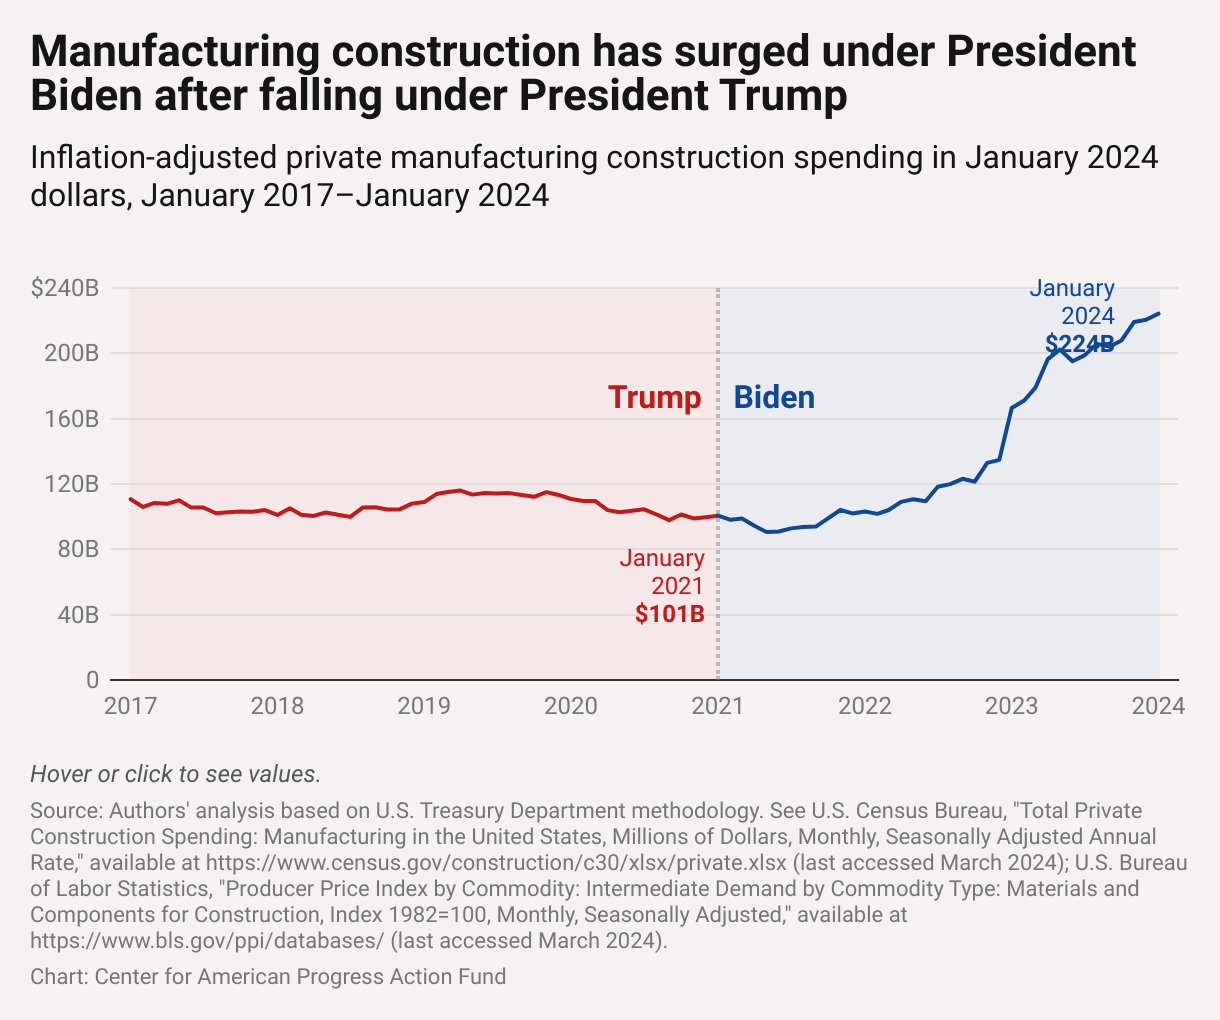 Chart showing a small rise in inflation-adjusted manufacturing construction spending under President Donald Trump before the pandemic and a decline during the pandemic, compared with a sharp rise under President Joe Biden beginning in 2022.